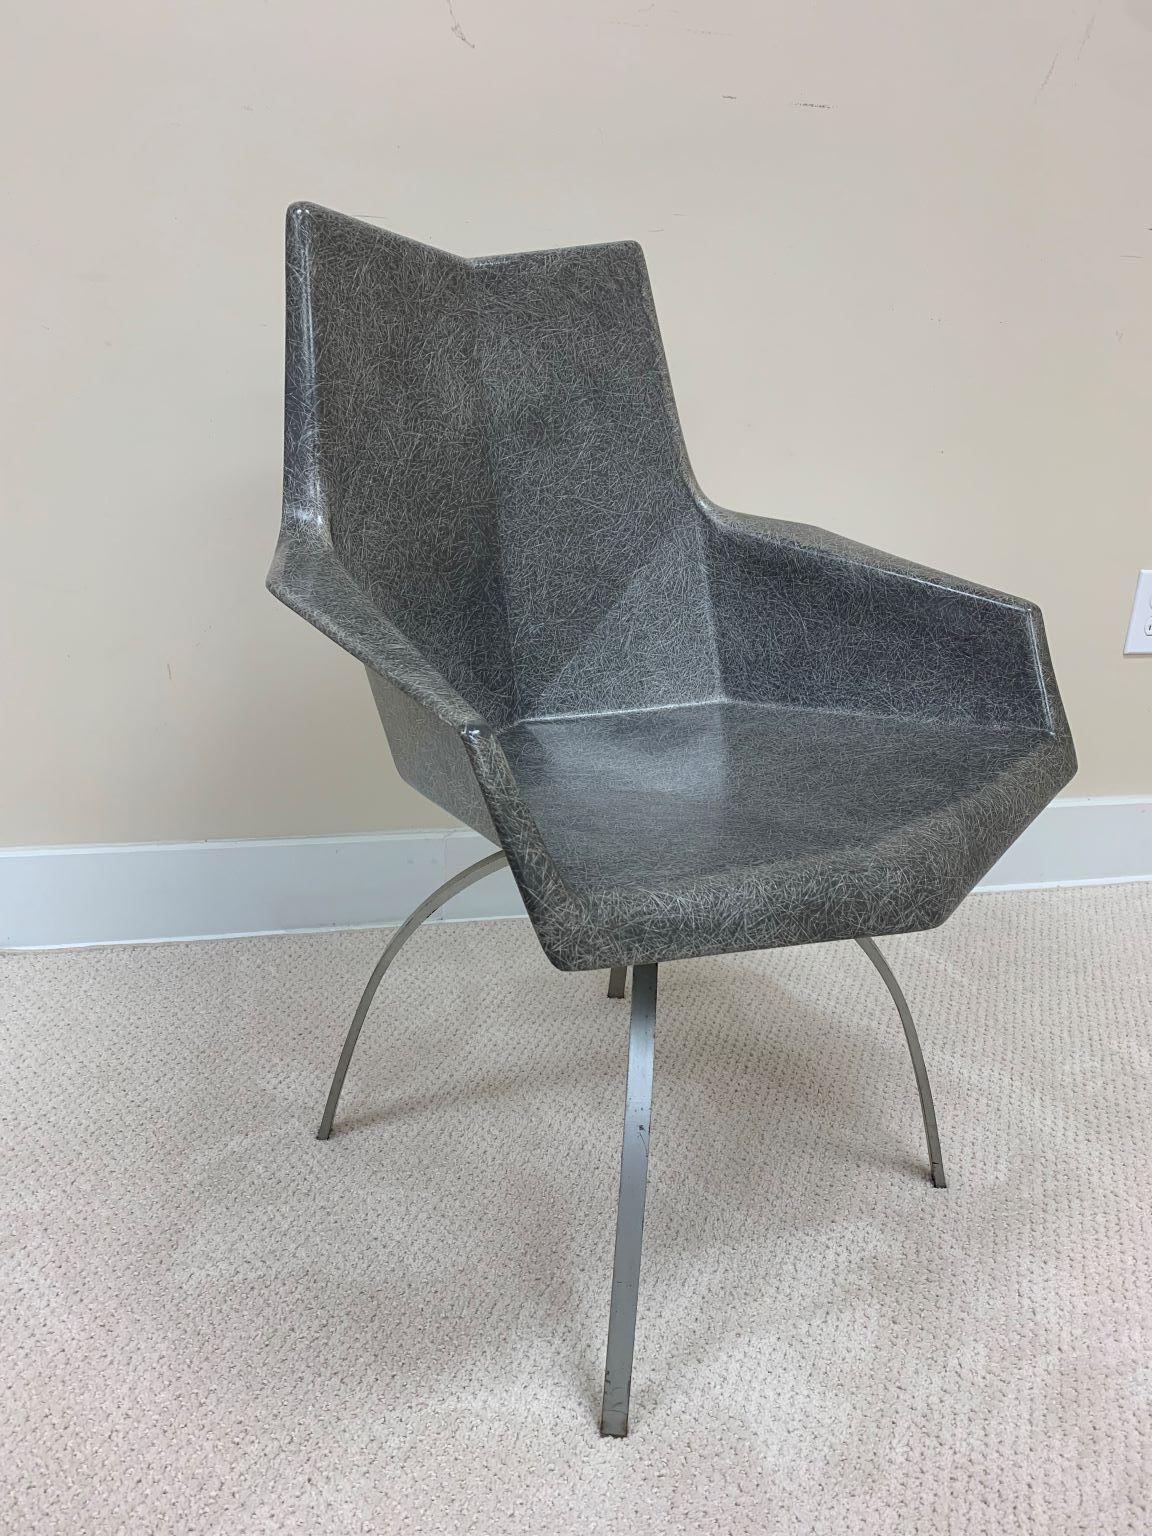 Iconic and Rare Origami Fiberglass Chair with Spider Leg Base by Paul McCobb 1